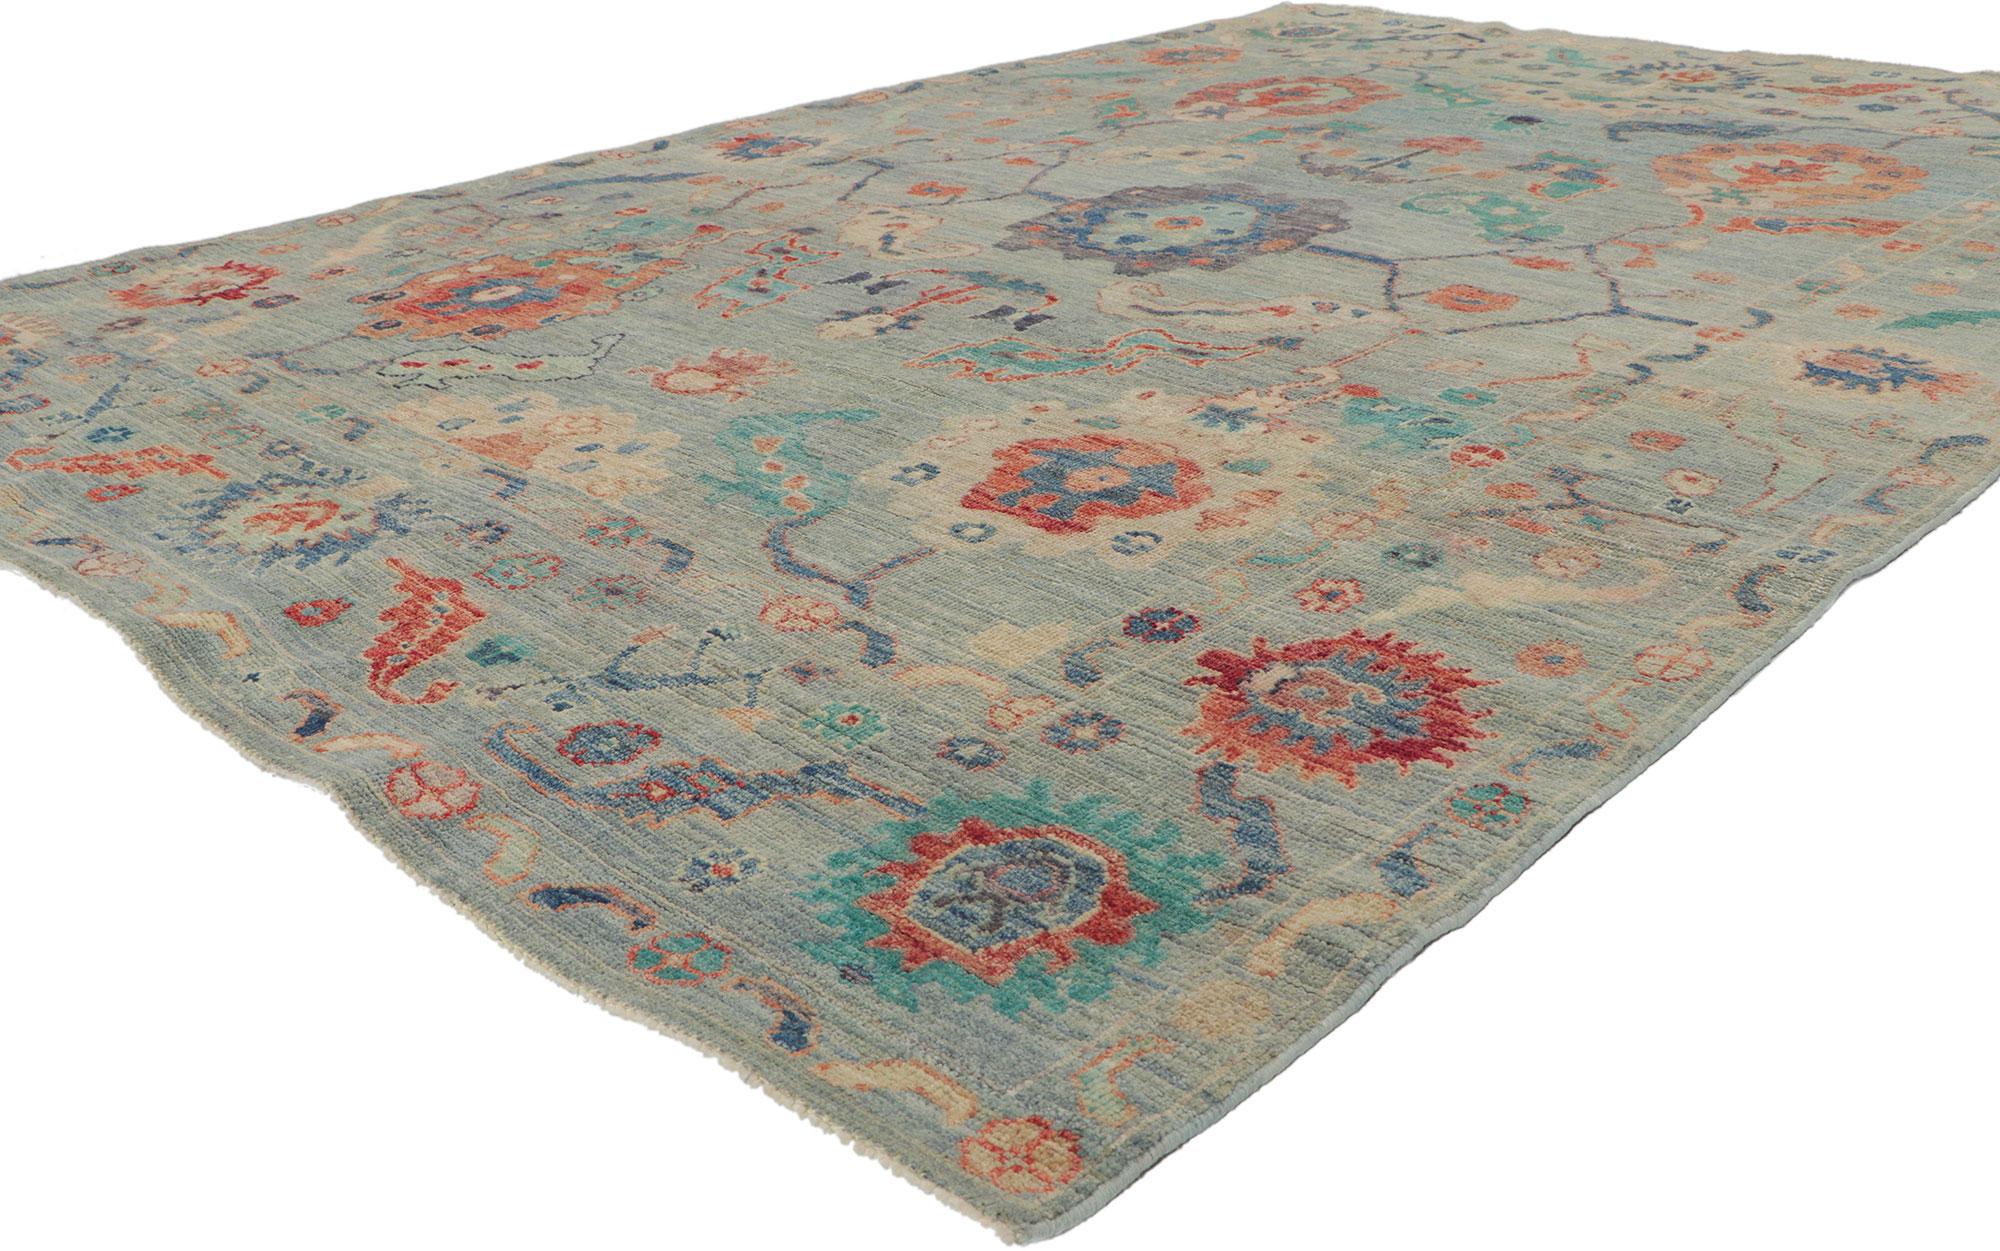 80889 New Modern Style Oushak rug with Soft Colors, 06'01 x 08'09. Polished and playful, this hand-knotted wool contemporary Contemporary Oushak rug beautifully embodies a modern style. The composition features an all-over botanical pattern composed